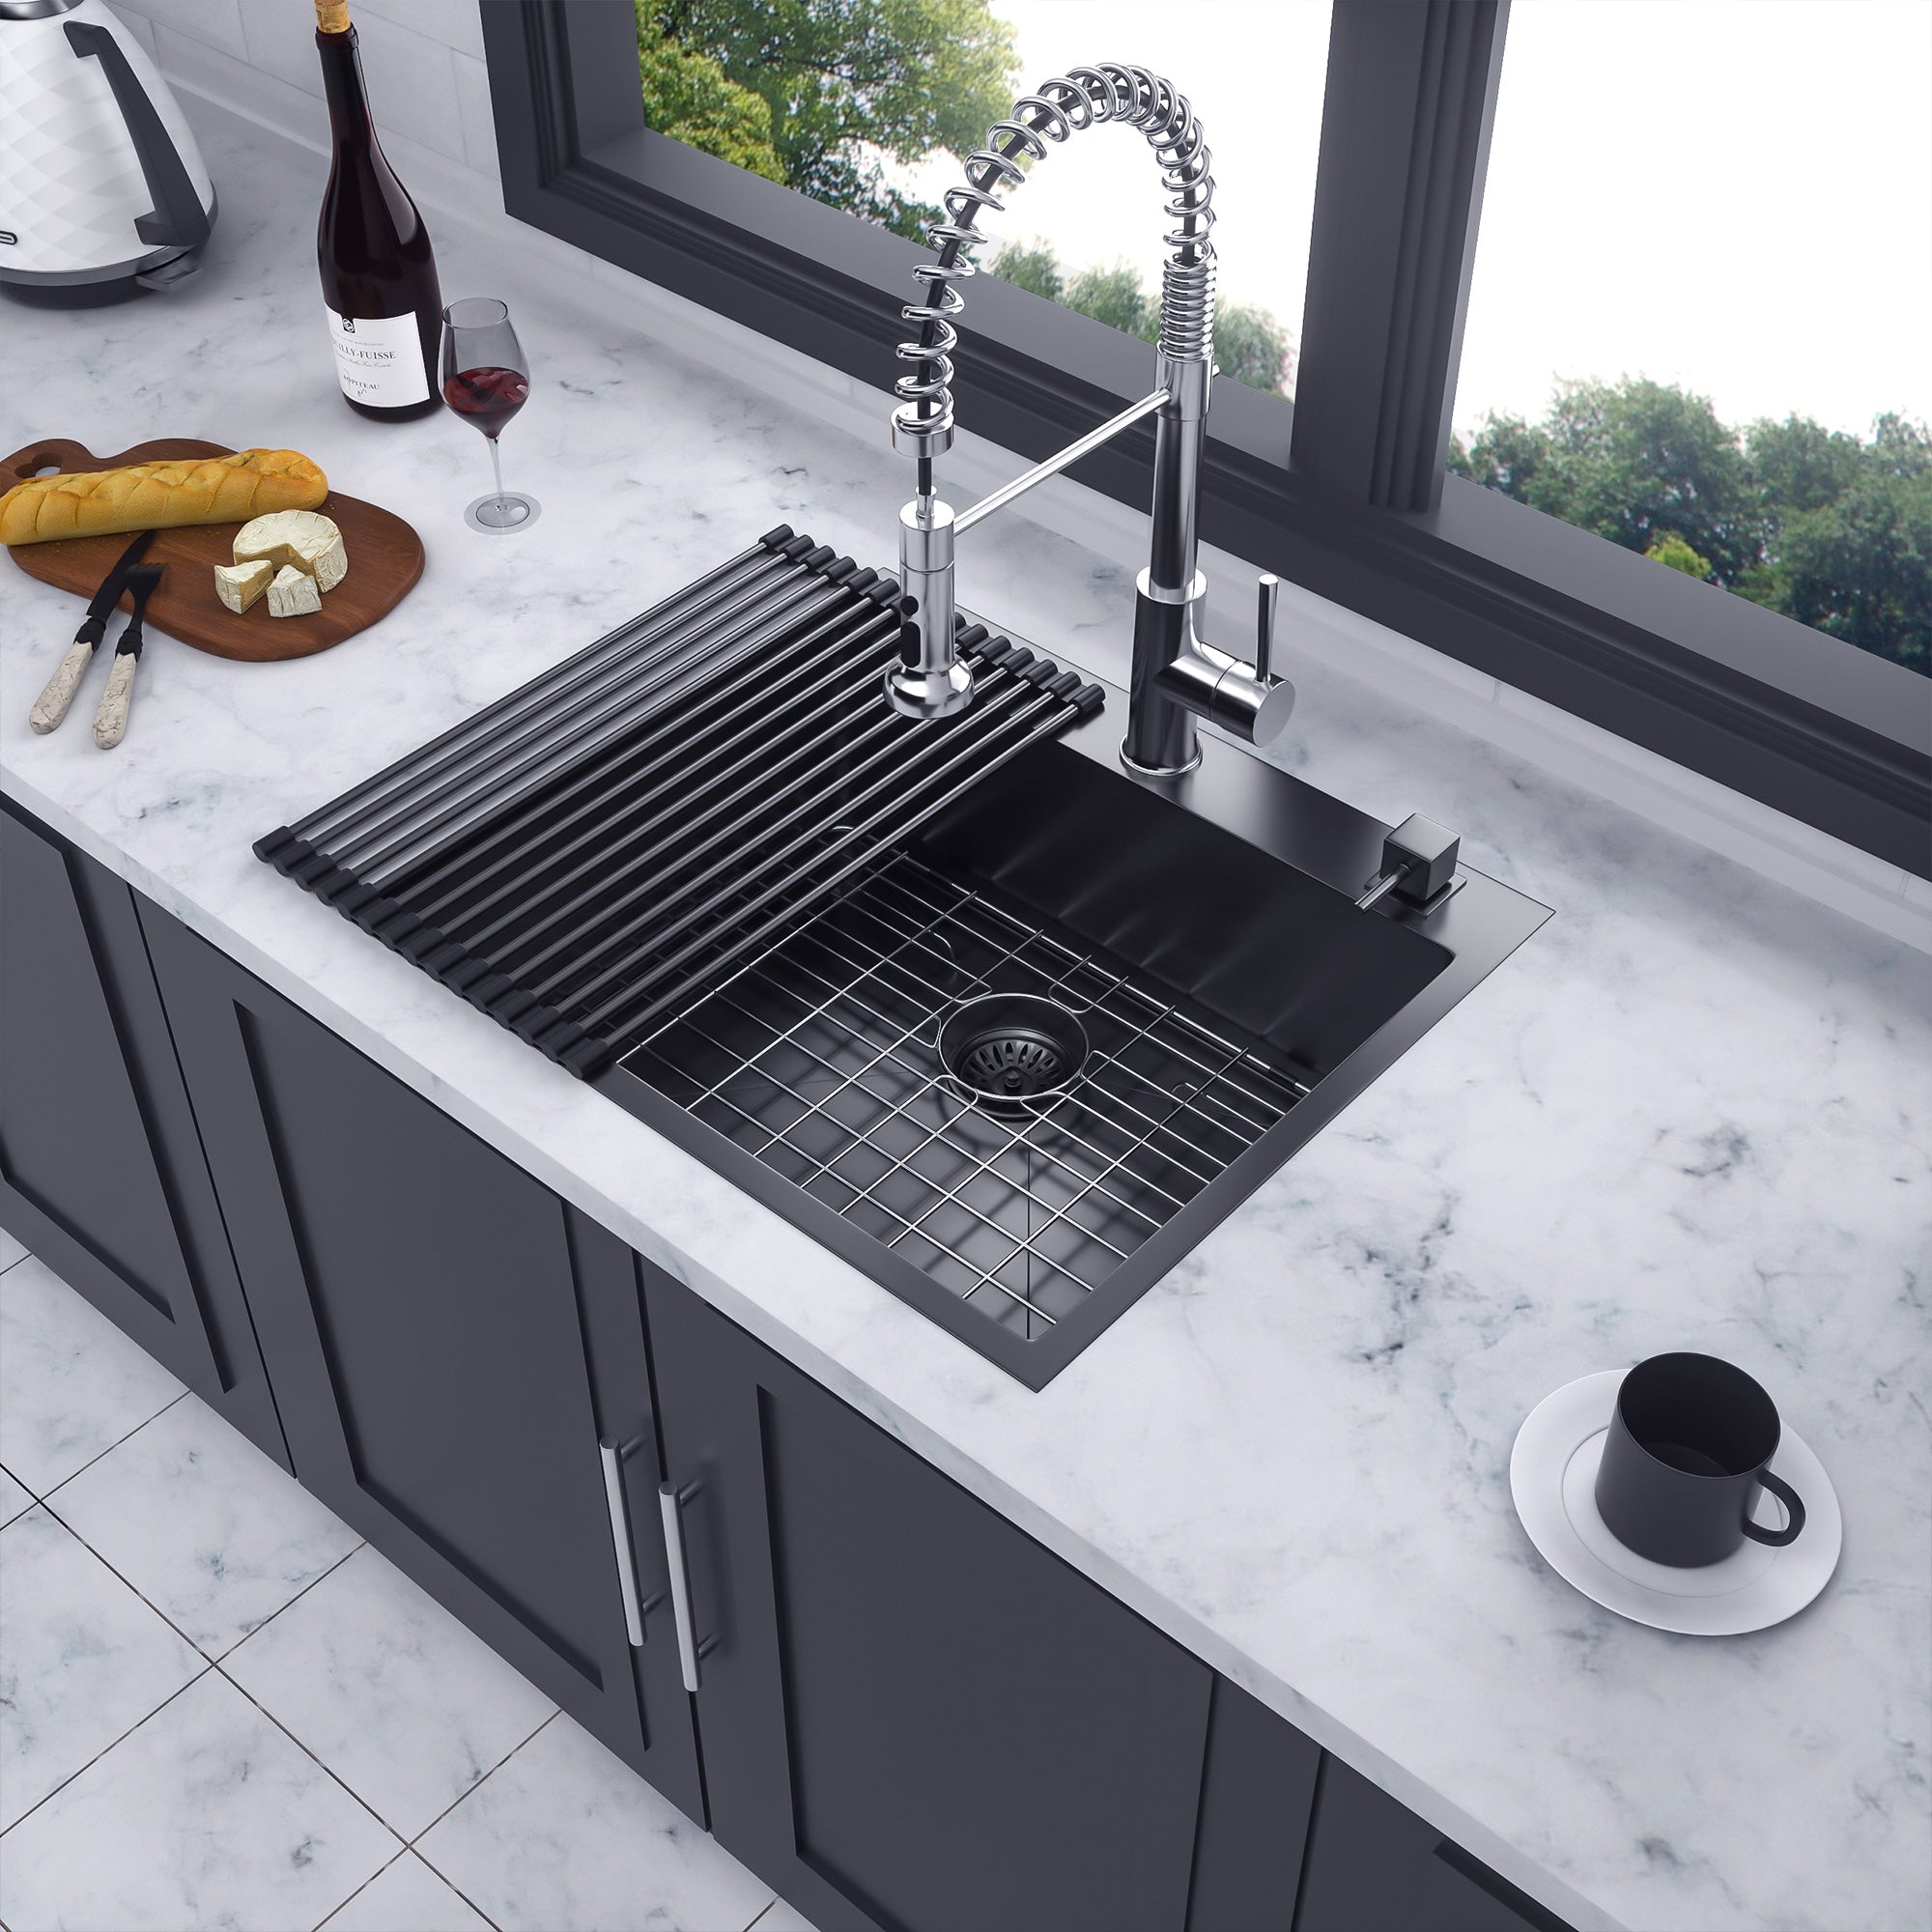 Drop-in Single Bowl Stainless Steel Kitchen Sink RX-SS17